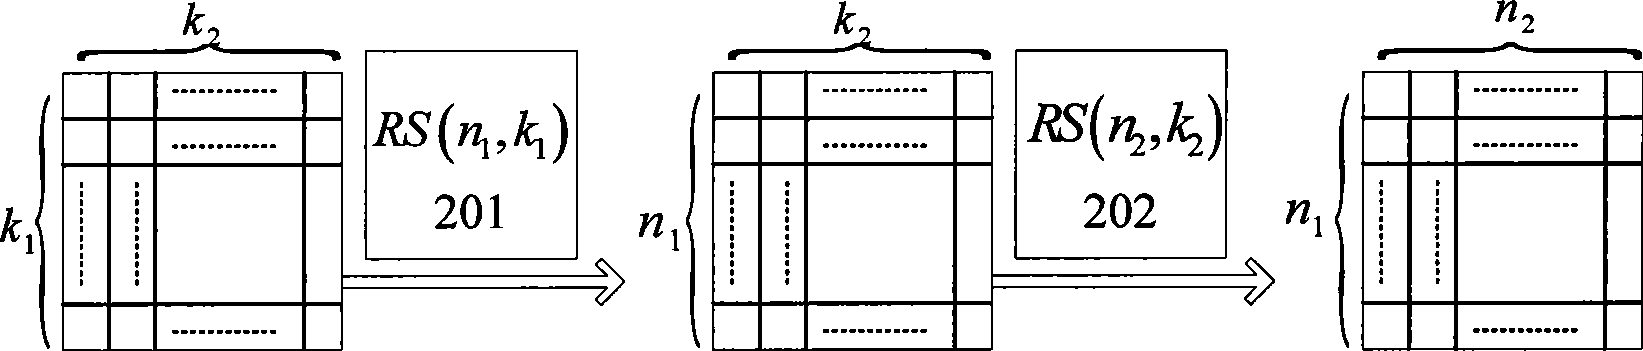 Interference resisting method combining Reed-Solomon code with grid coding modulation technique